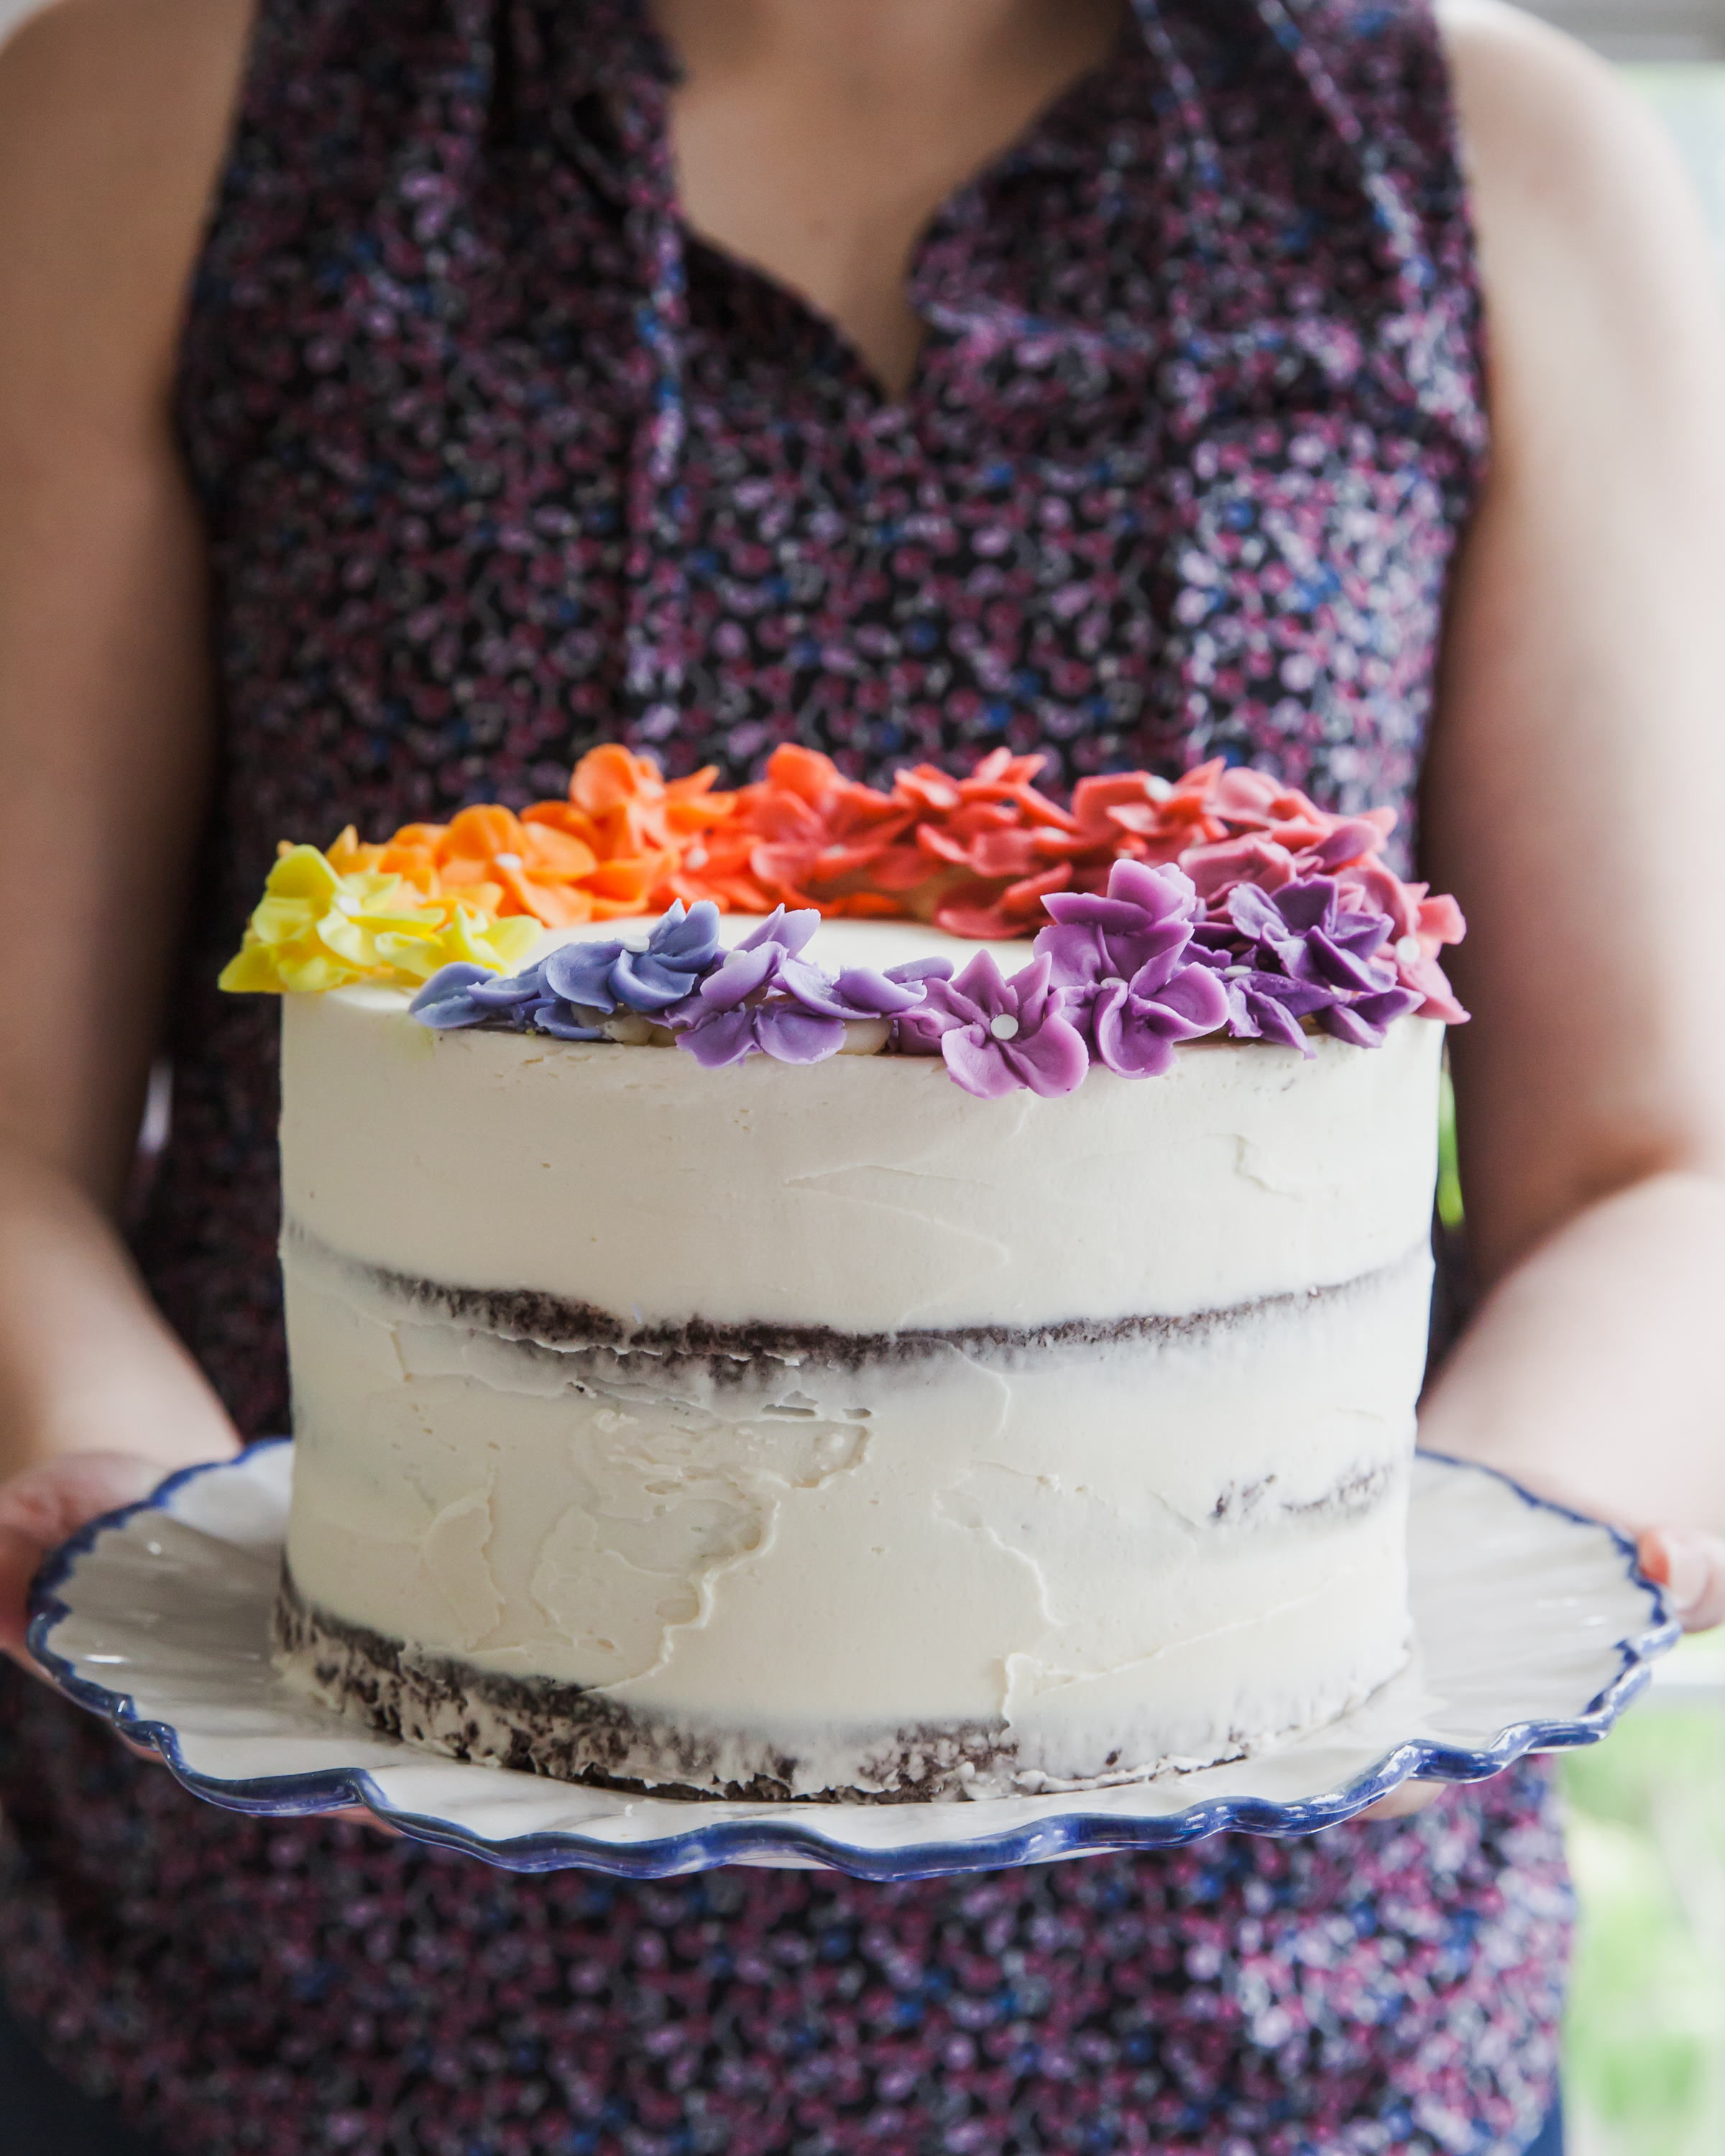 Rainbow Flower Cake with layers of eggless chocolate cake and peanut butter filling